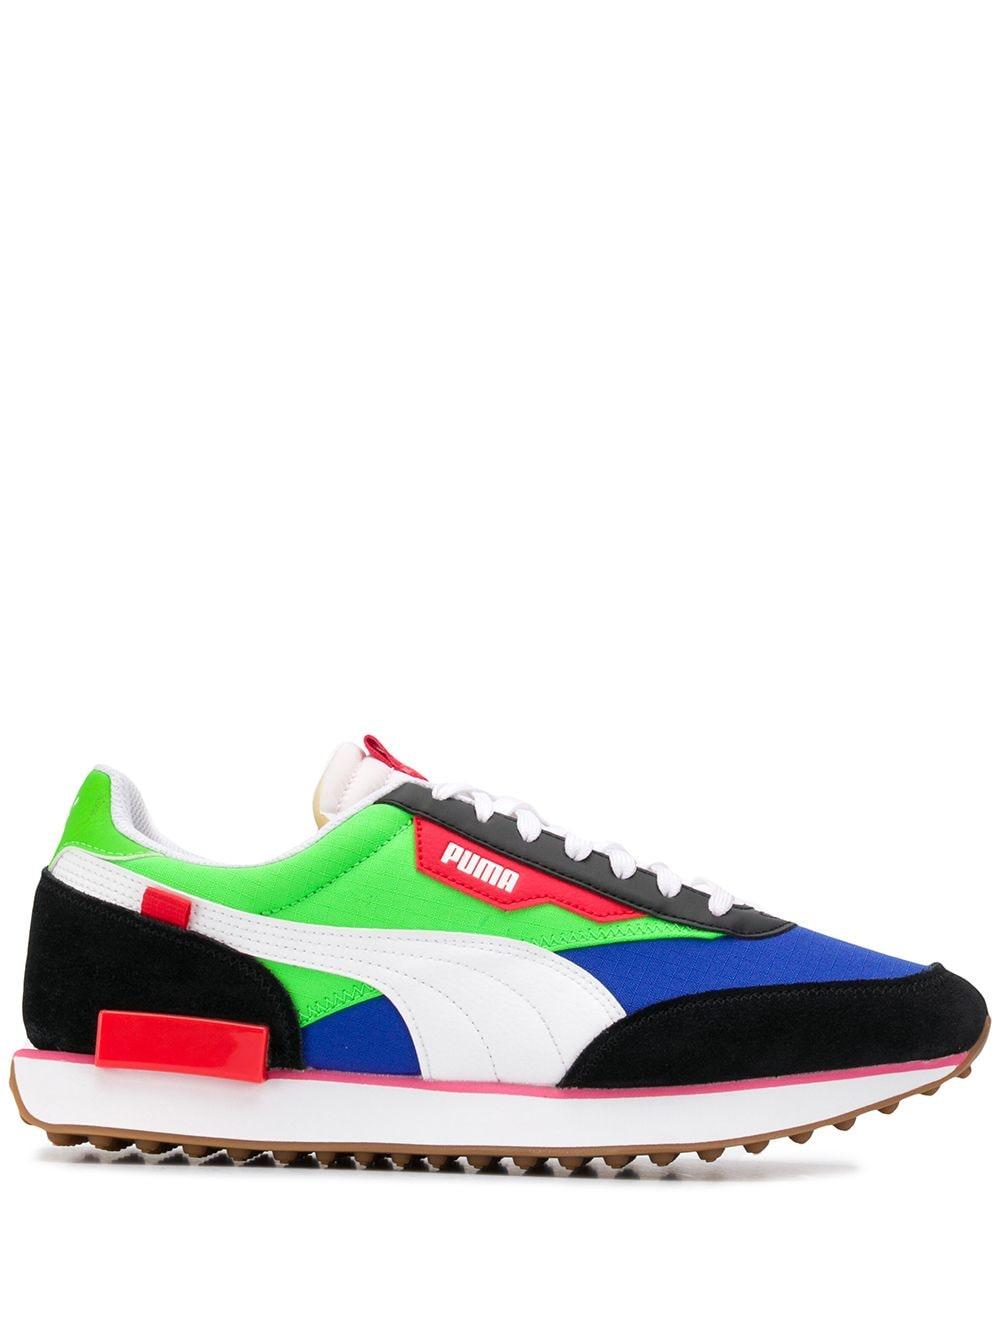 PUMA Future Rider Play On Sneakers in Green | Lyst